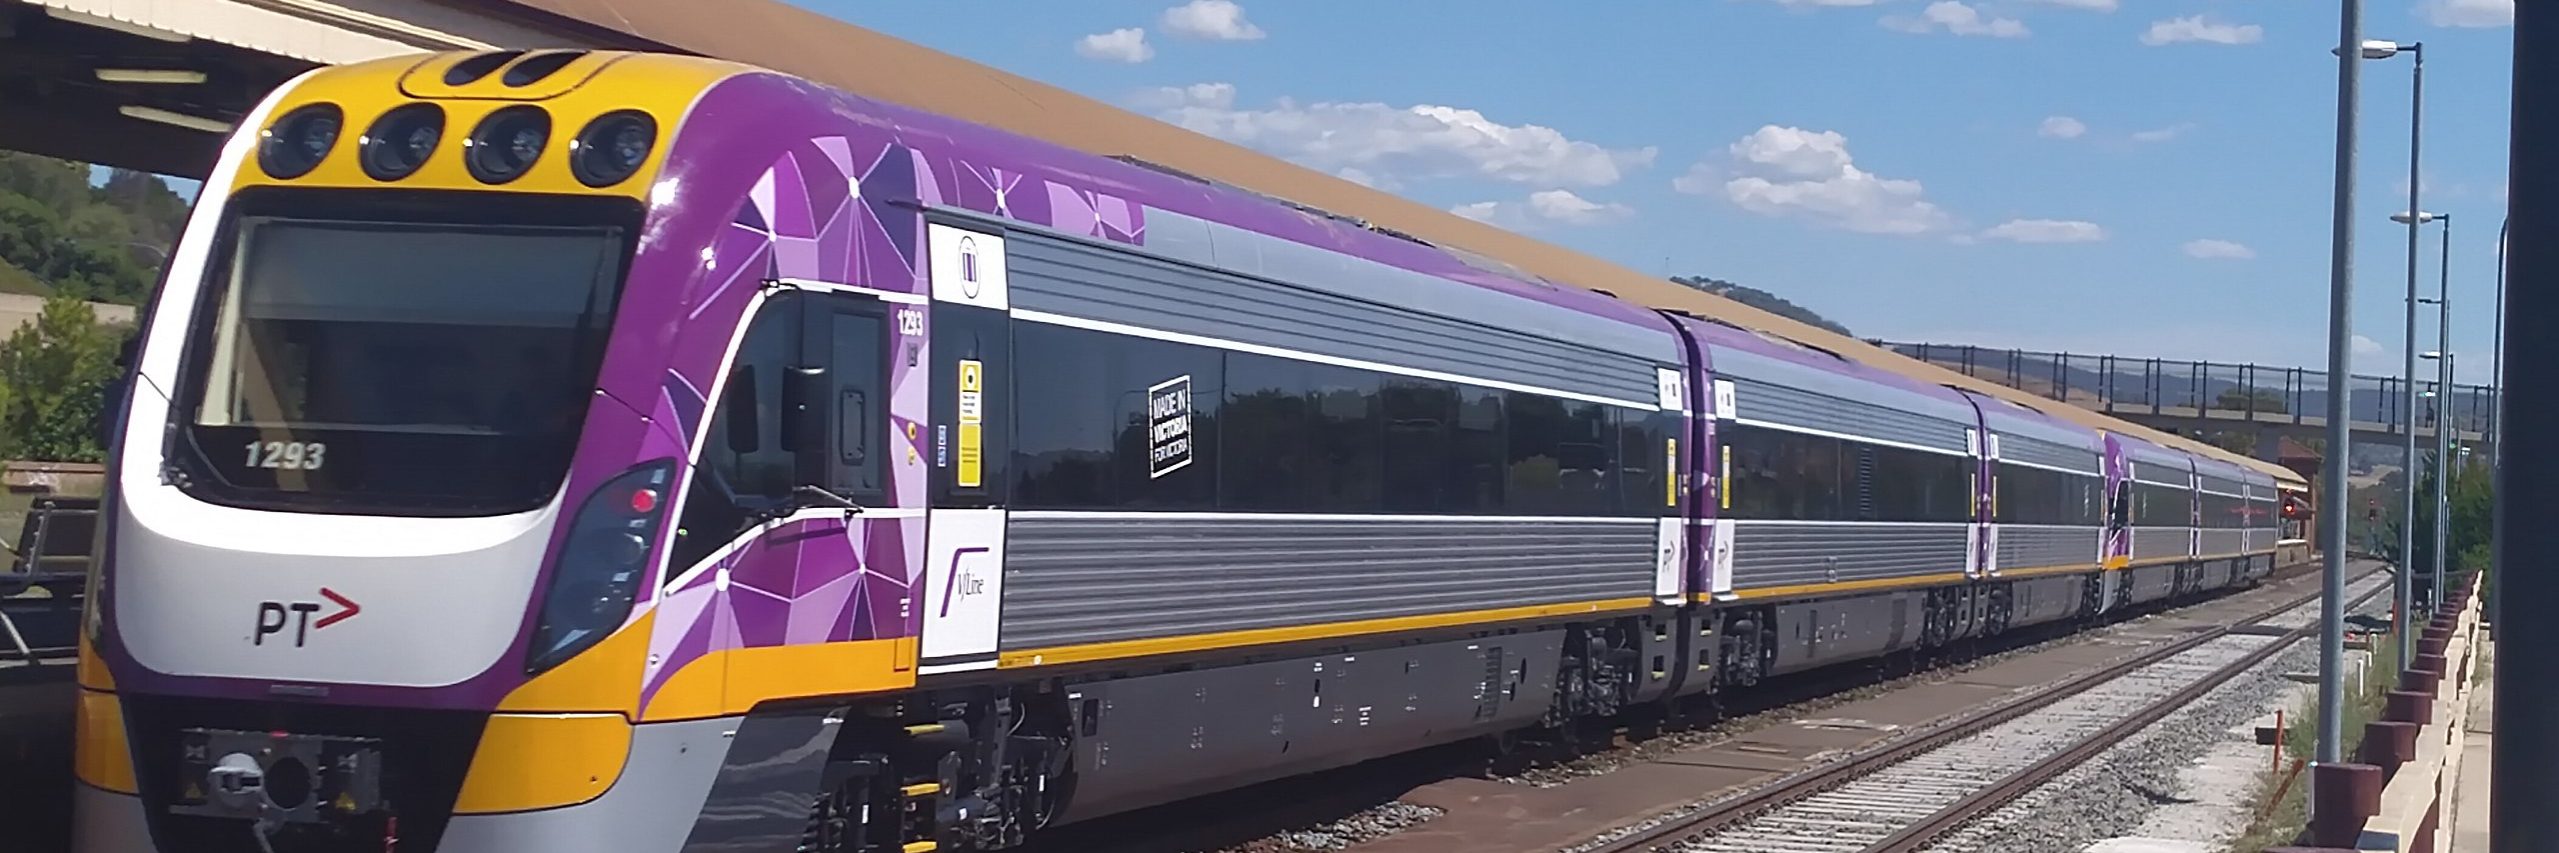 A purple v/line train similar to the one involved in today's Geelong train crash